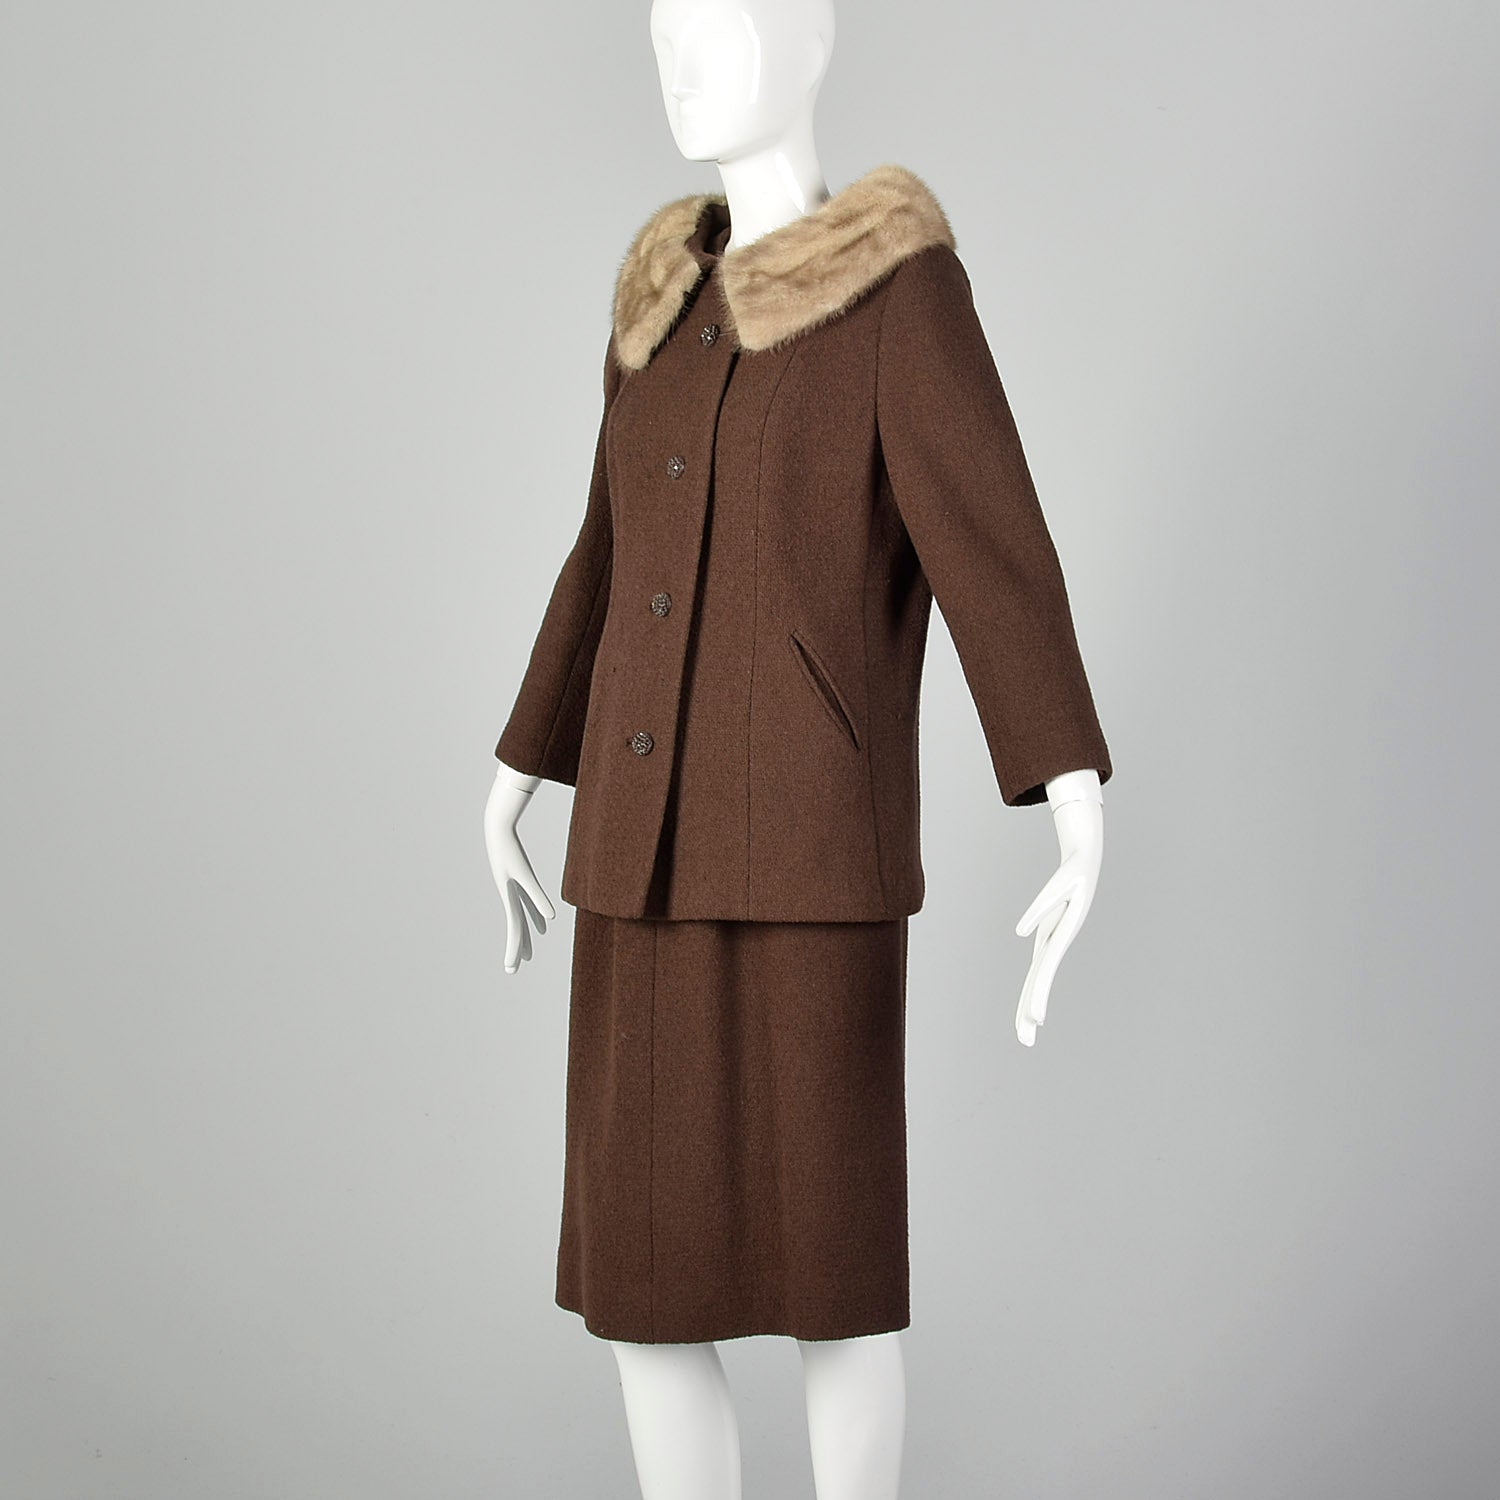 Small 1960s Brown Tweed Skirt Suit with Mink Collar